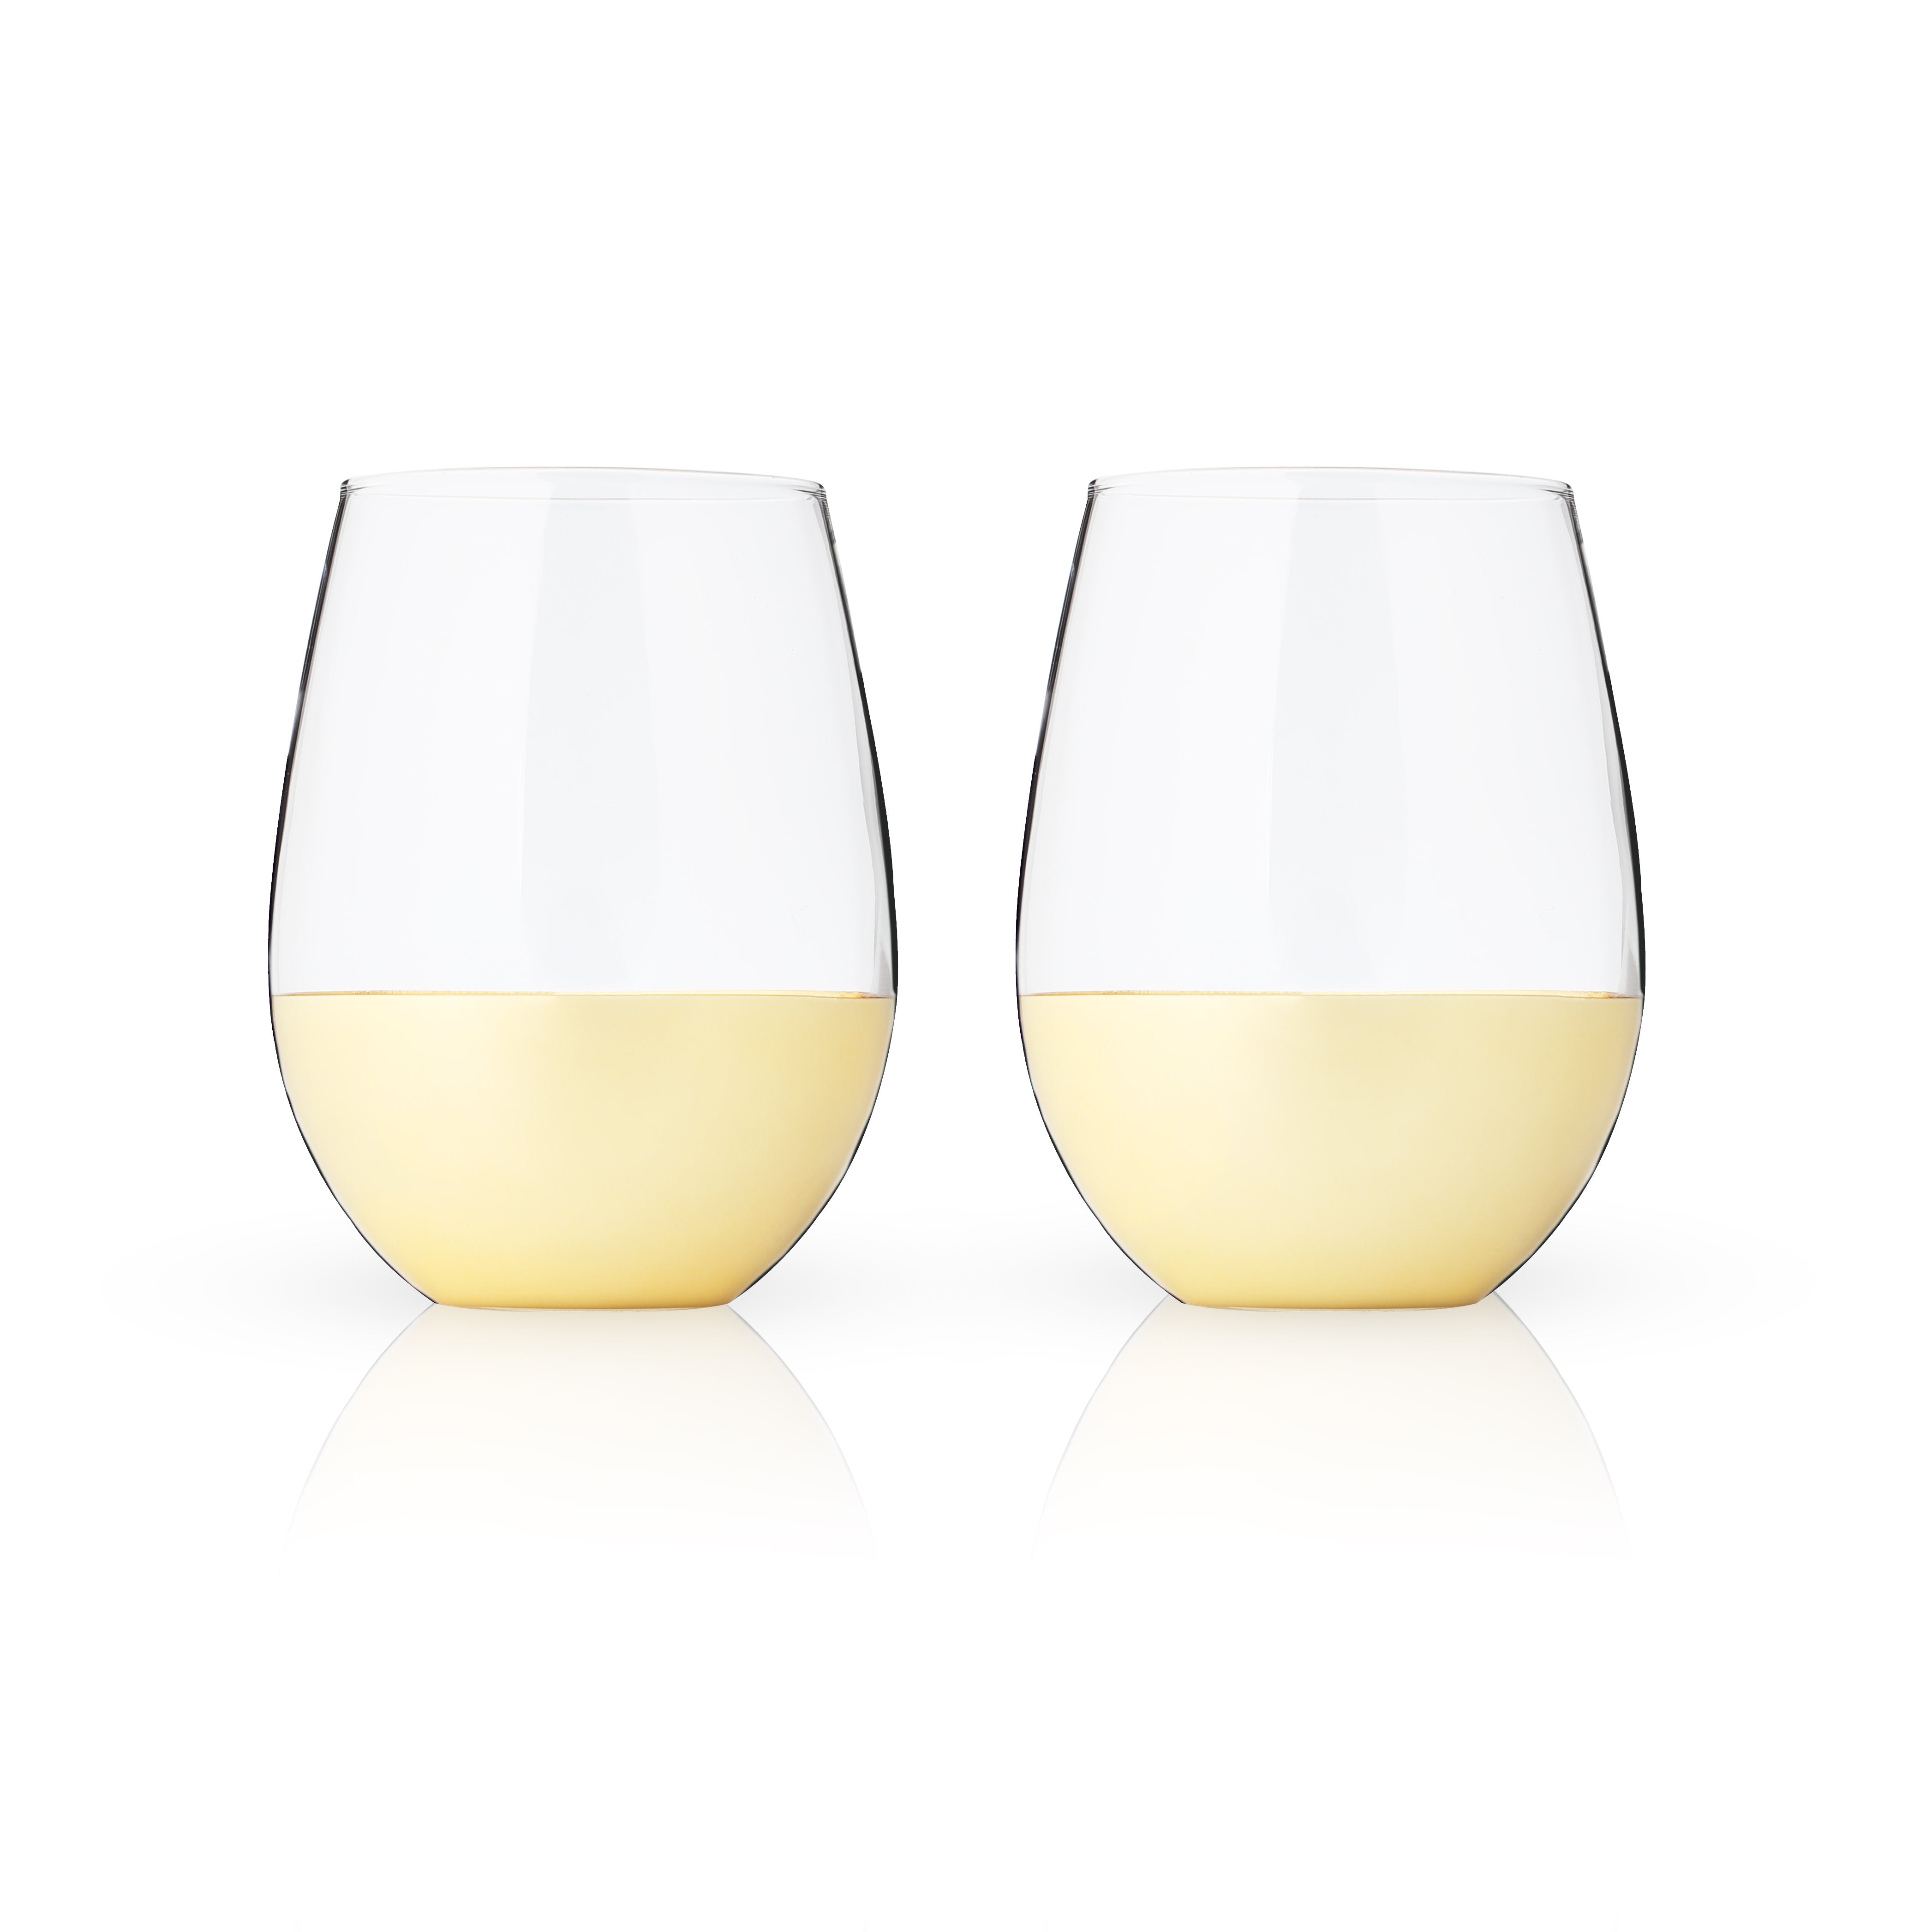 Good Friends Stemless Wine Glass Pair - The Crystal Shoppe